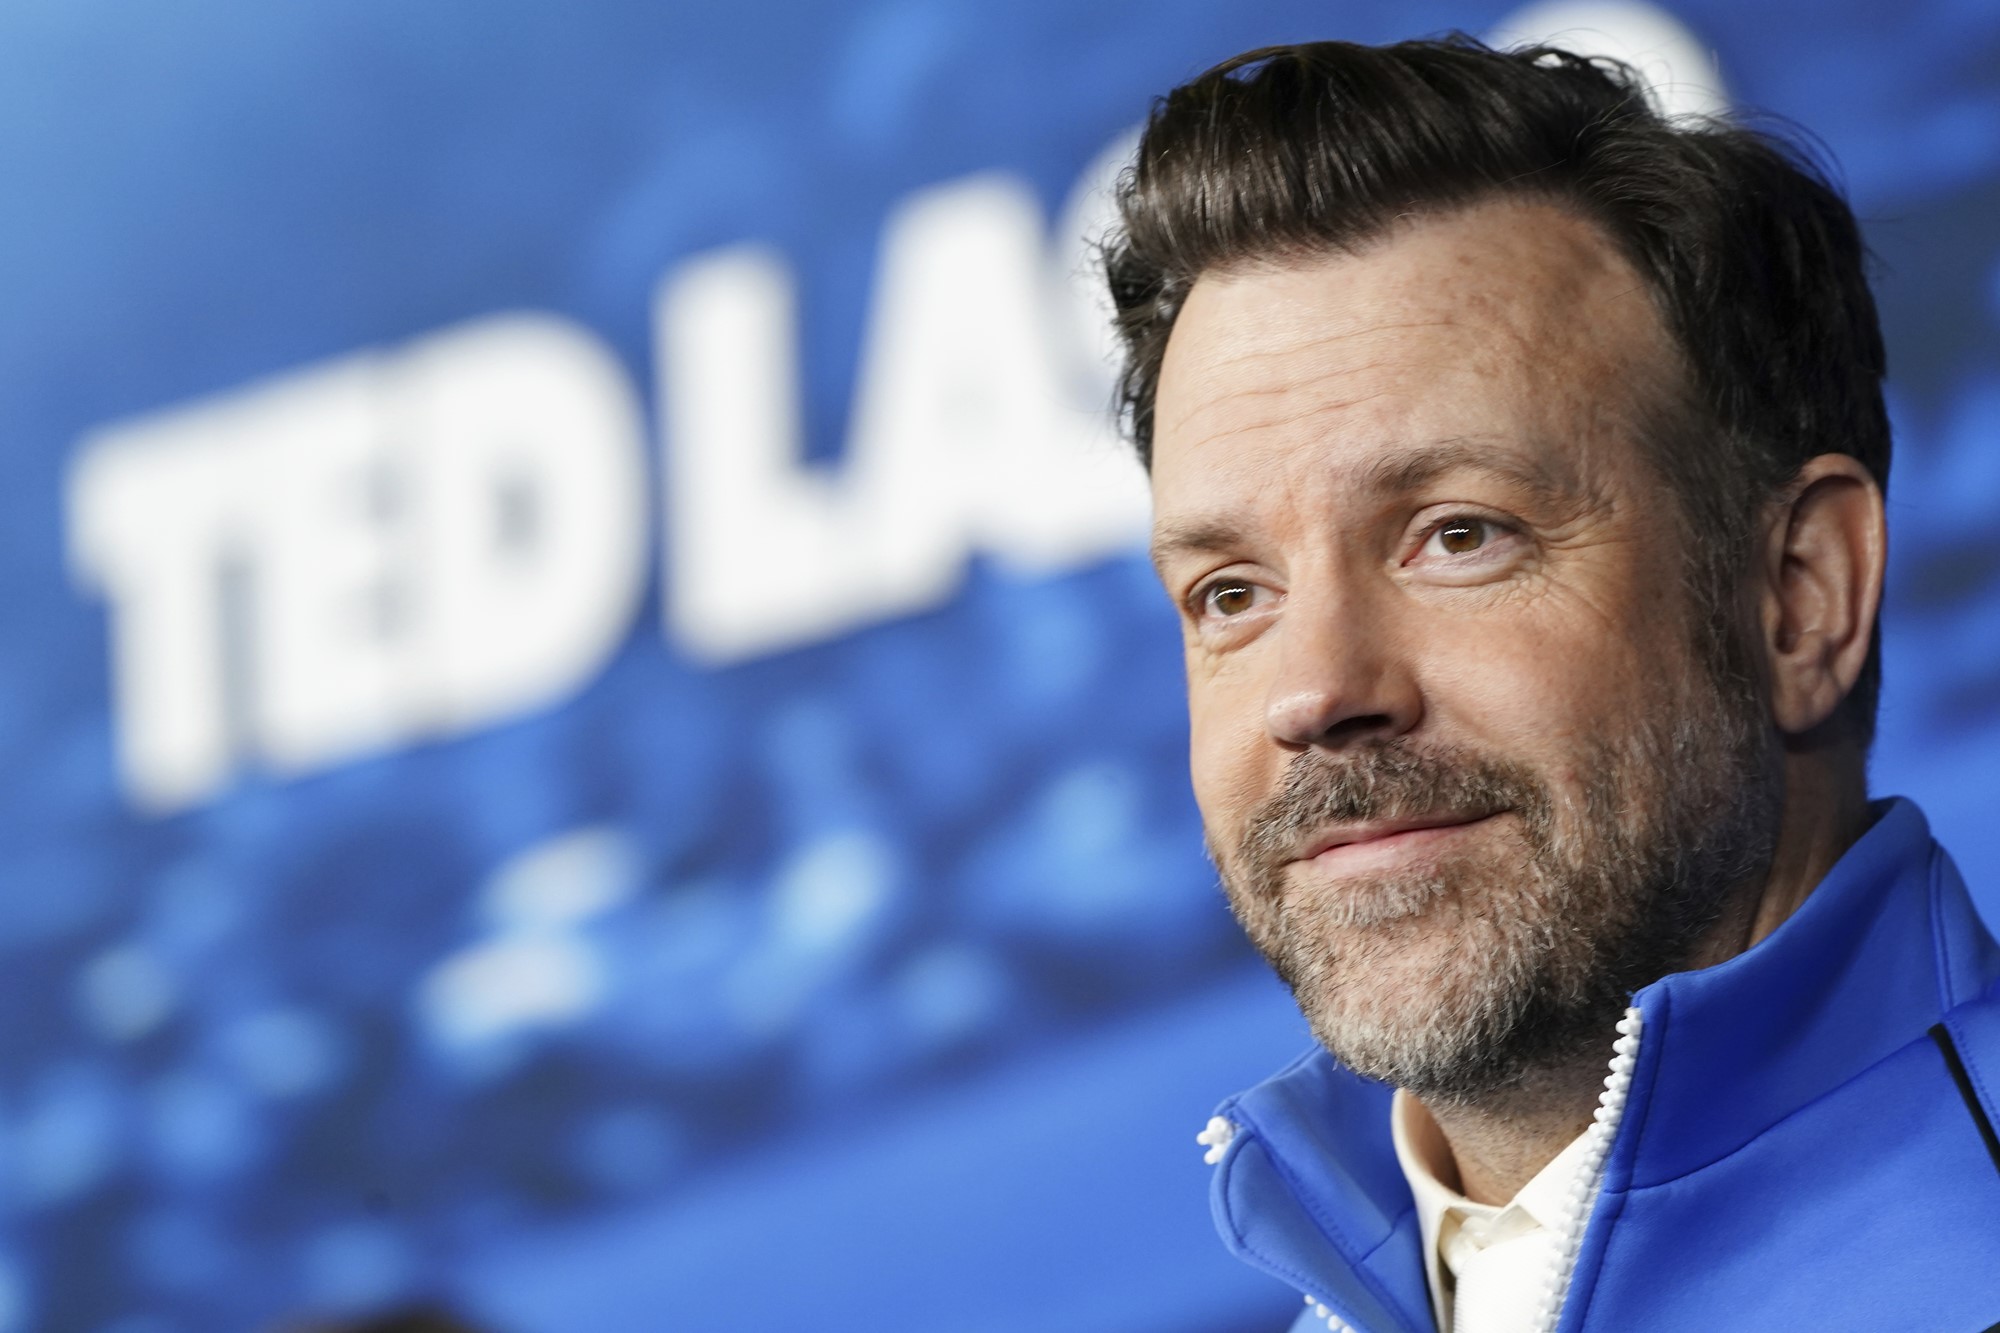 Jason Sudeikis in front of a Ted Lasso sign